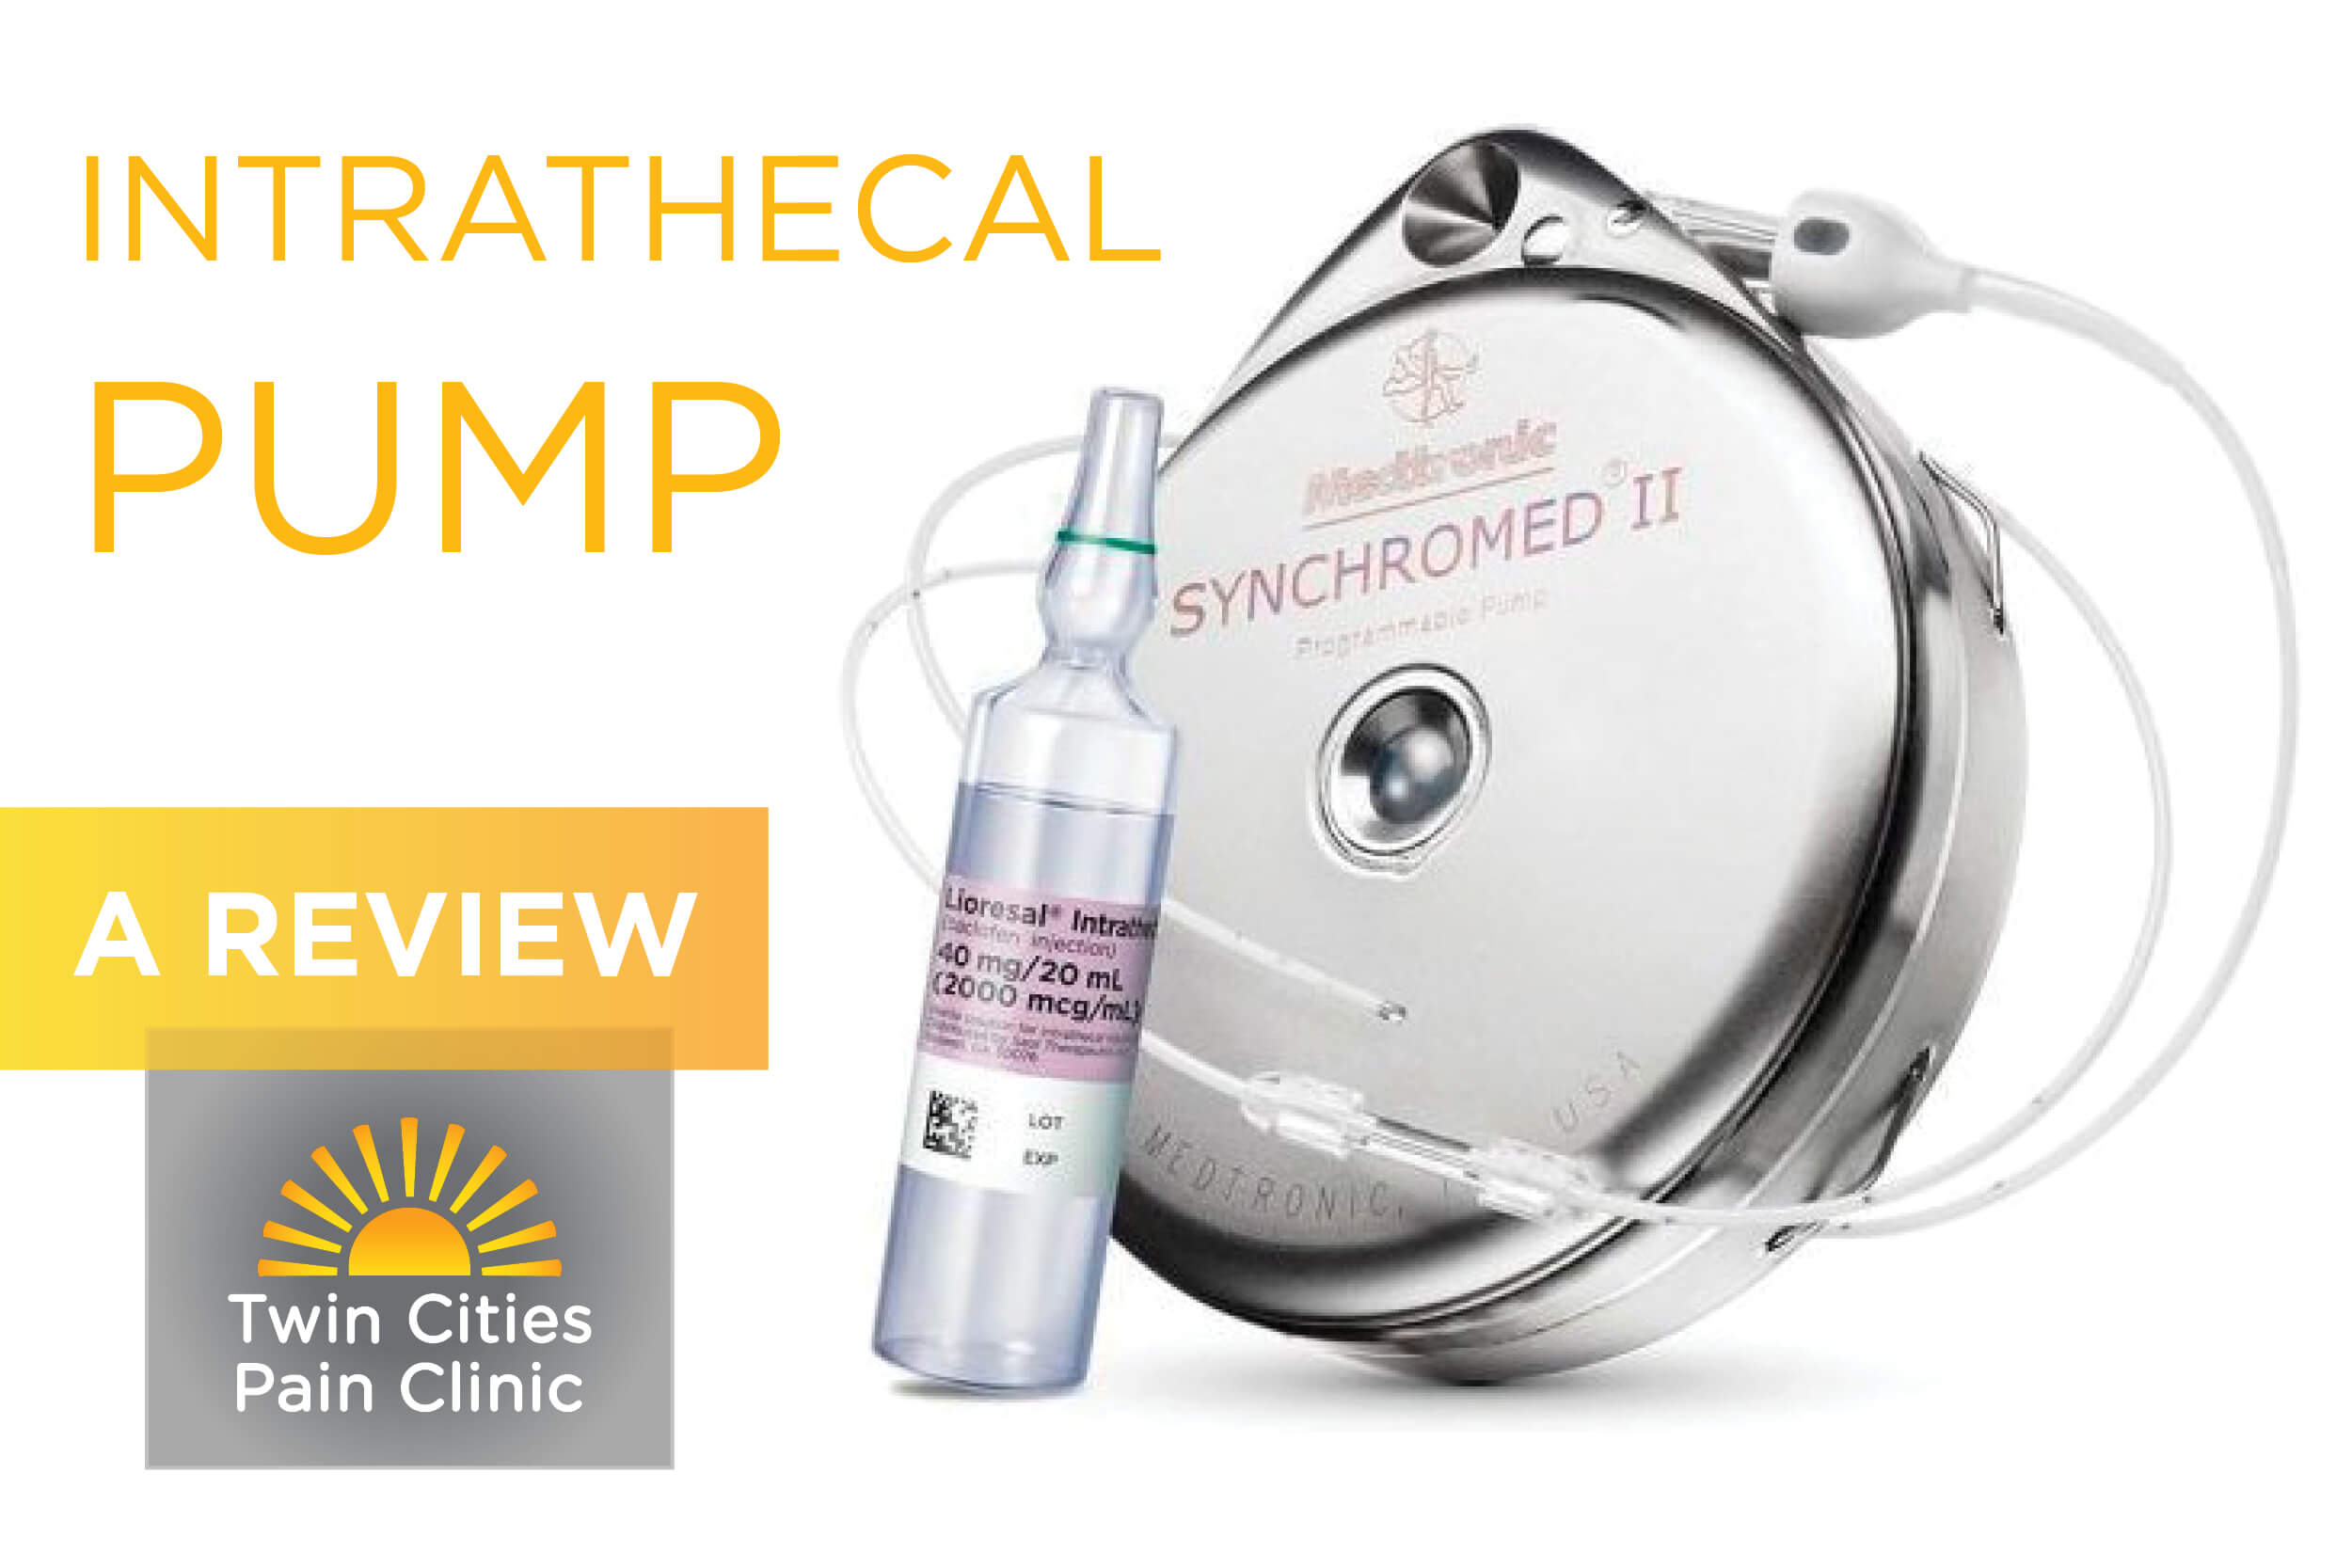 Intrathecal Pain Pump - A Review